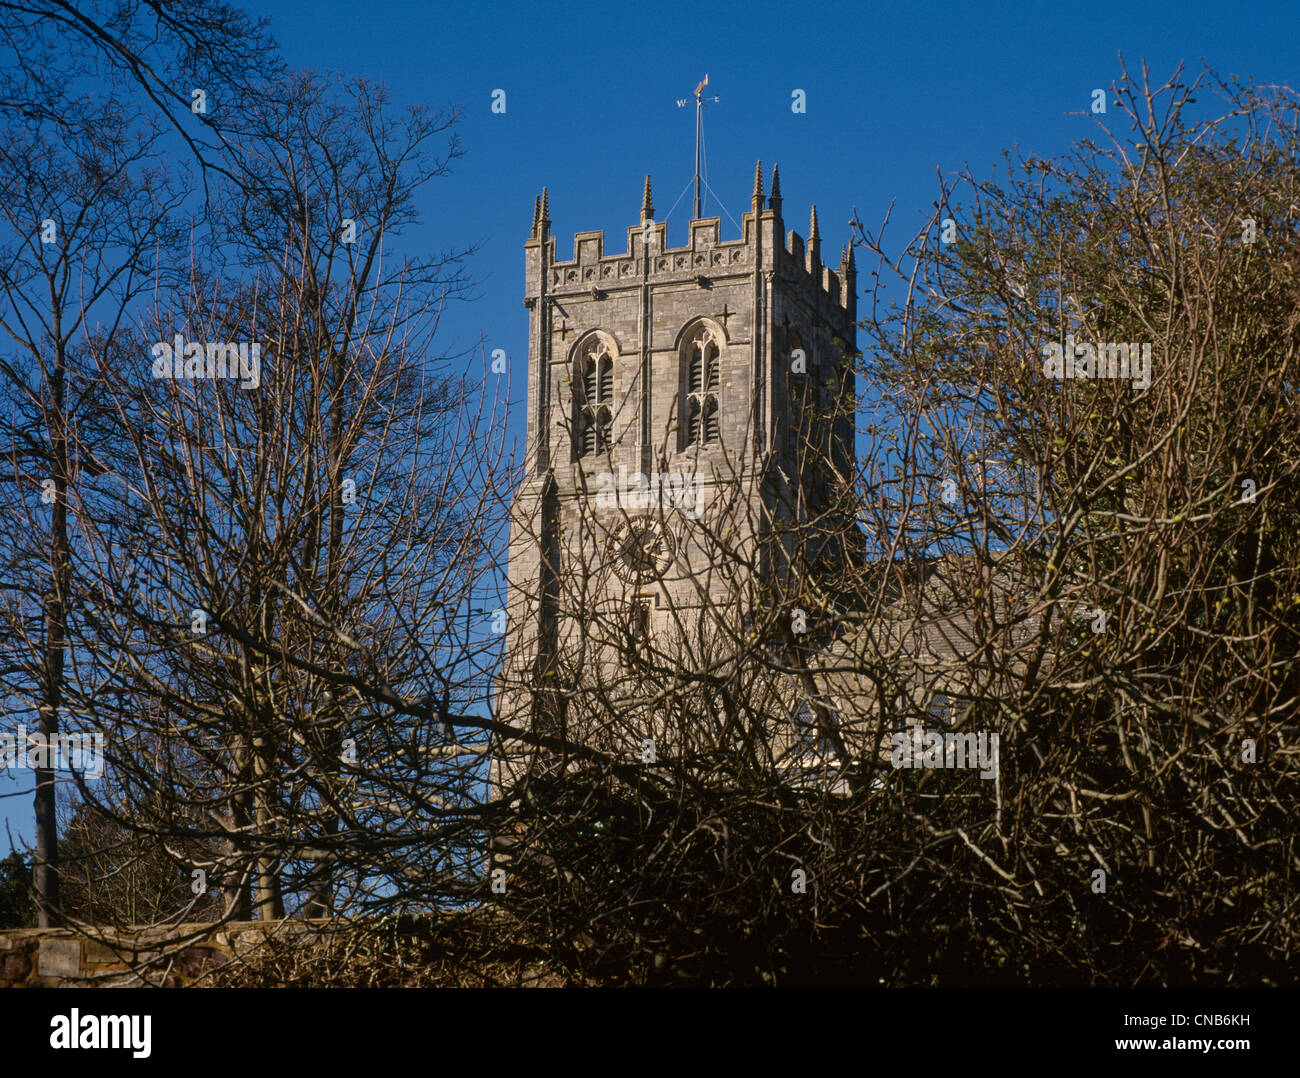 Christchurch Dorset Priory Detail of W tower partly covered by trees Stock Photo